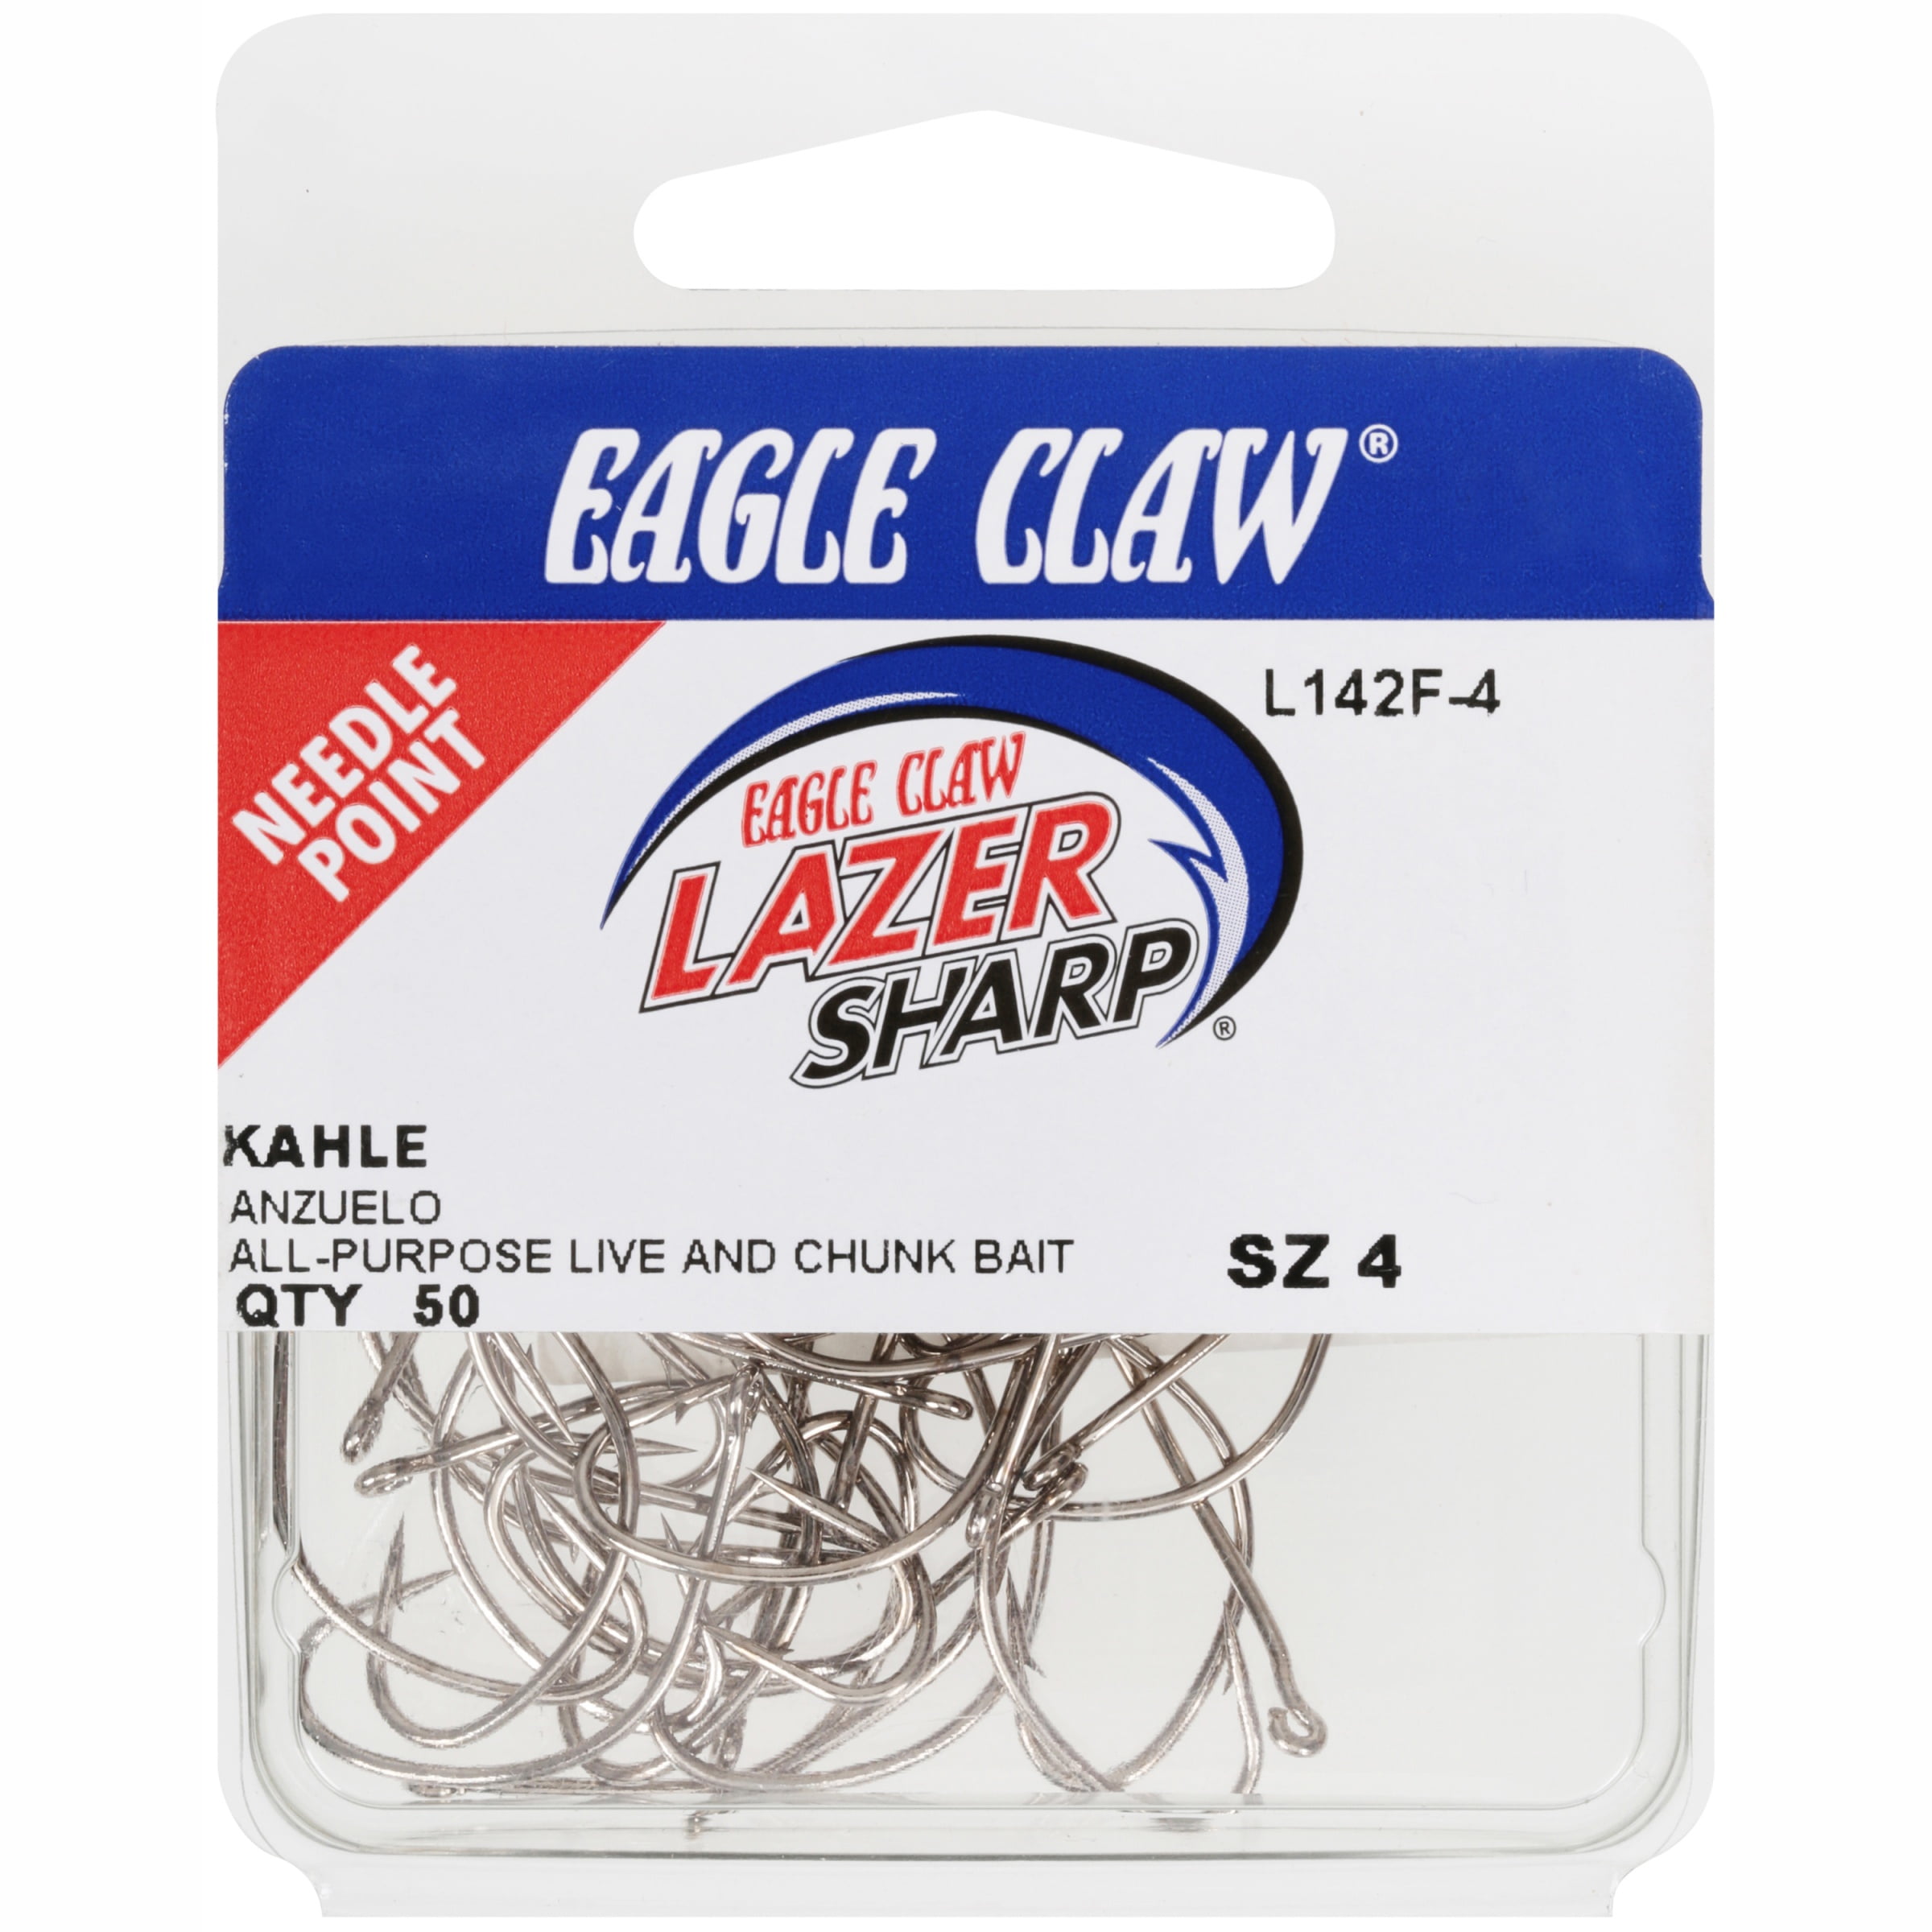 40 Pack Eagle Claw L142F Lazer Sharp Kahle All Purpose Fishing Hooks Pick A Size 